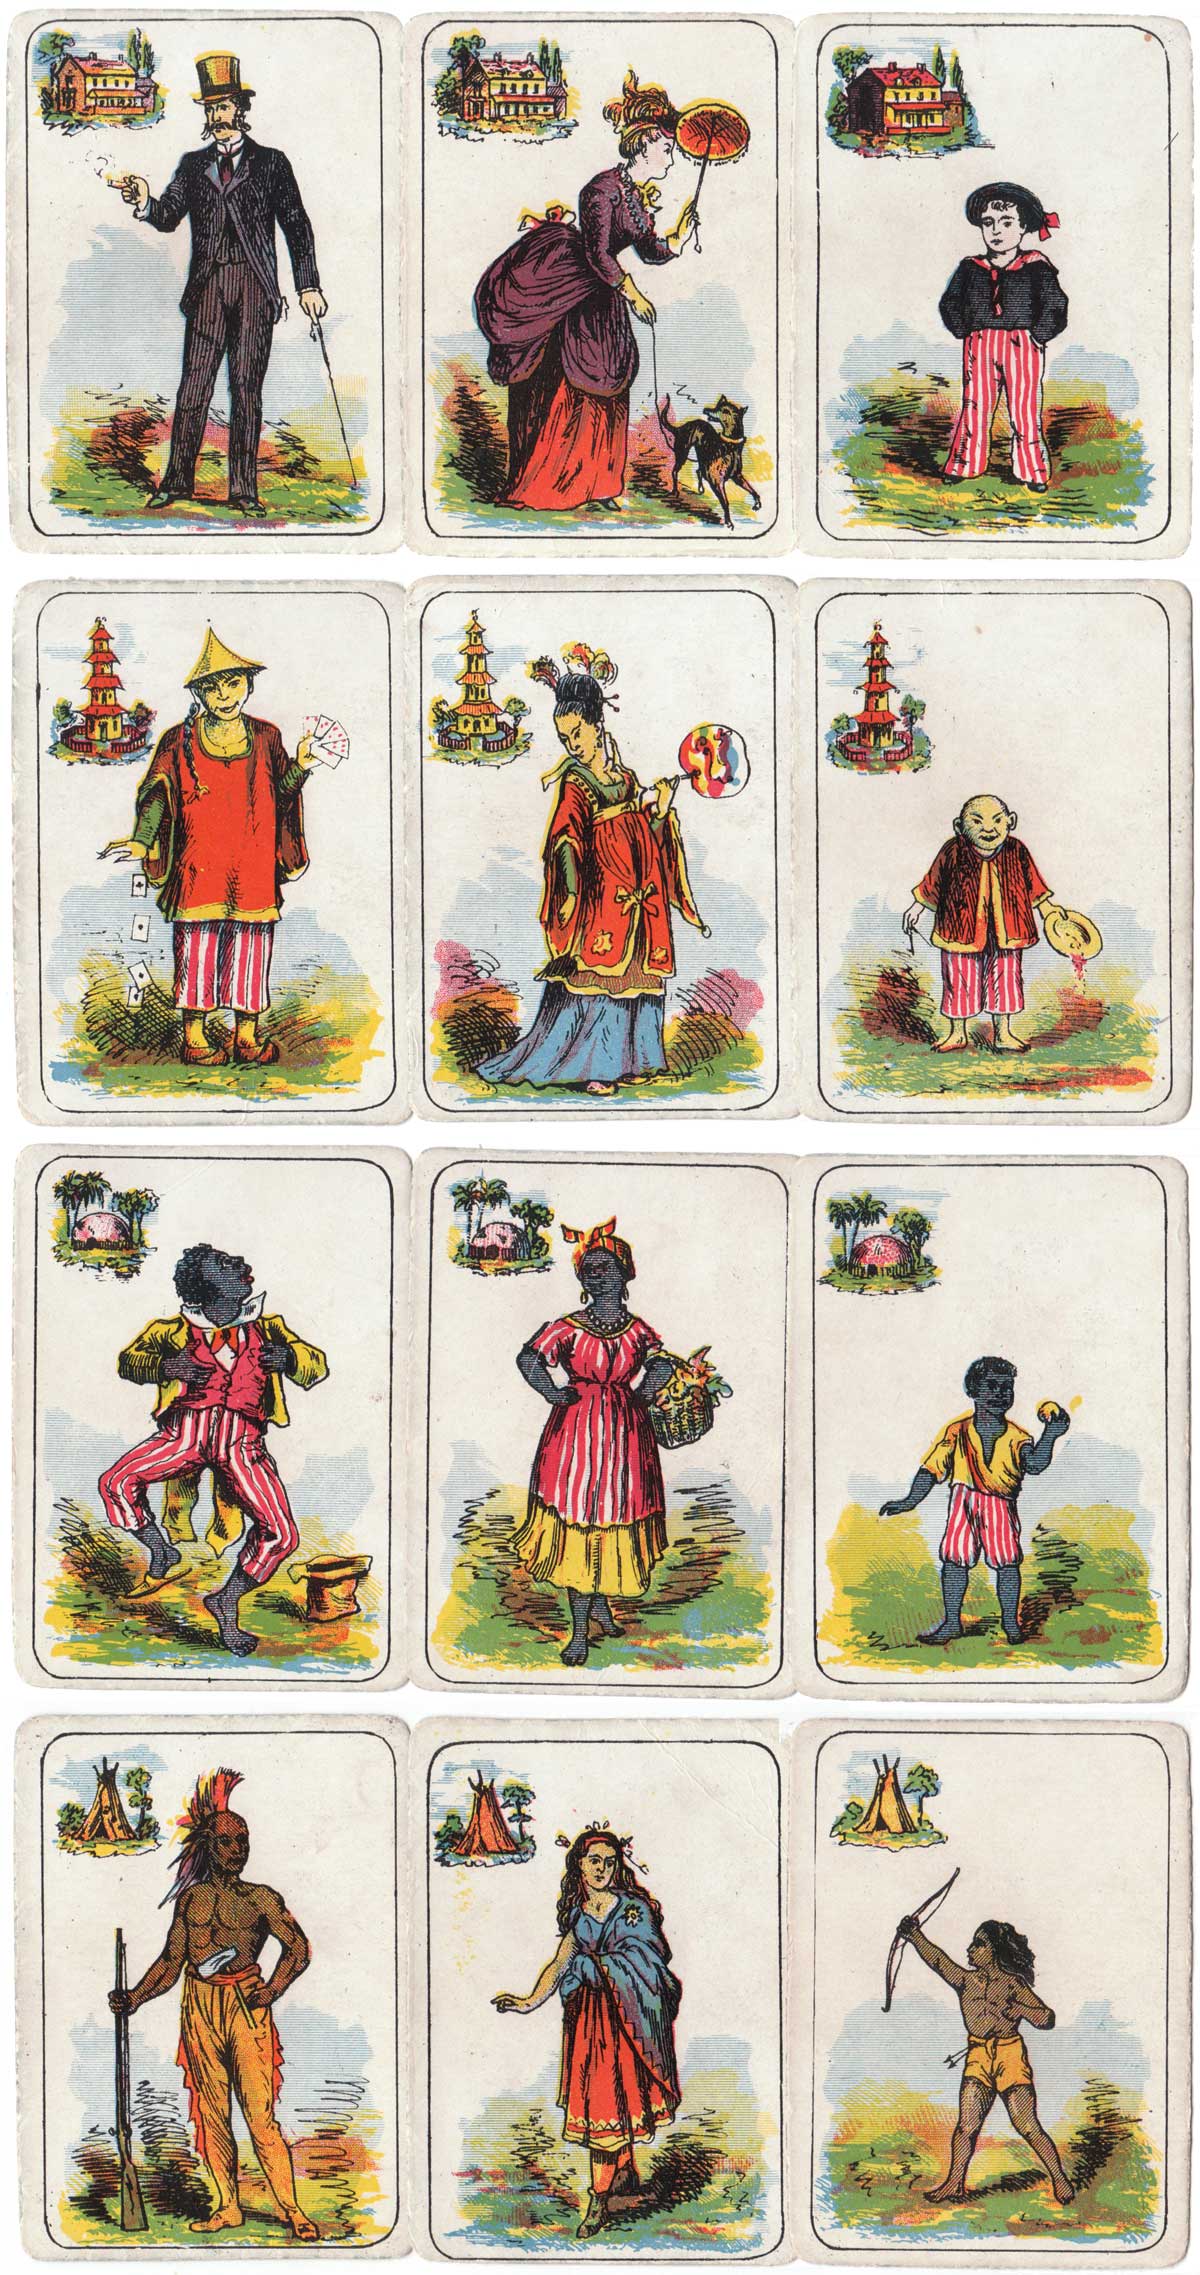 The Game of Nations manufactured by McLoughlin Brothers, 1890s